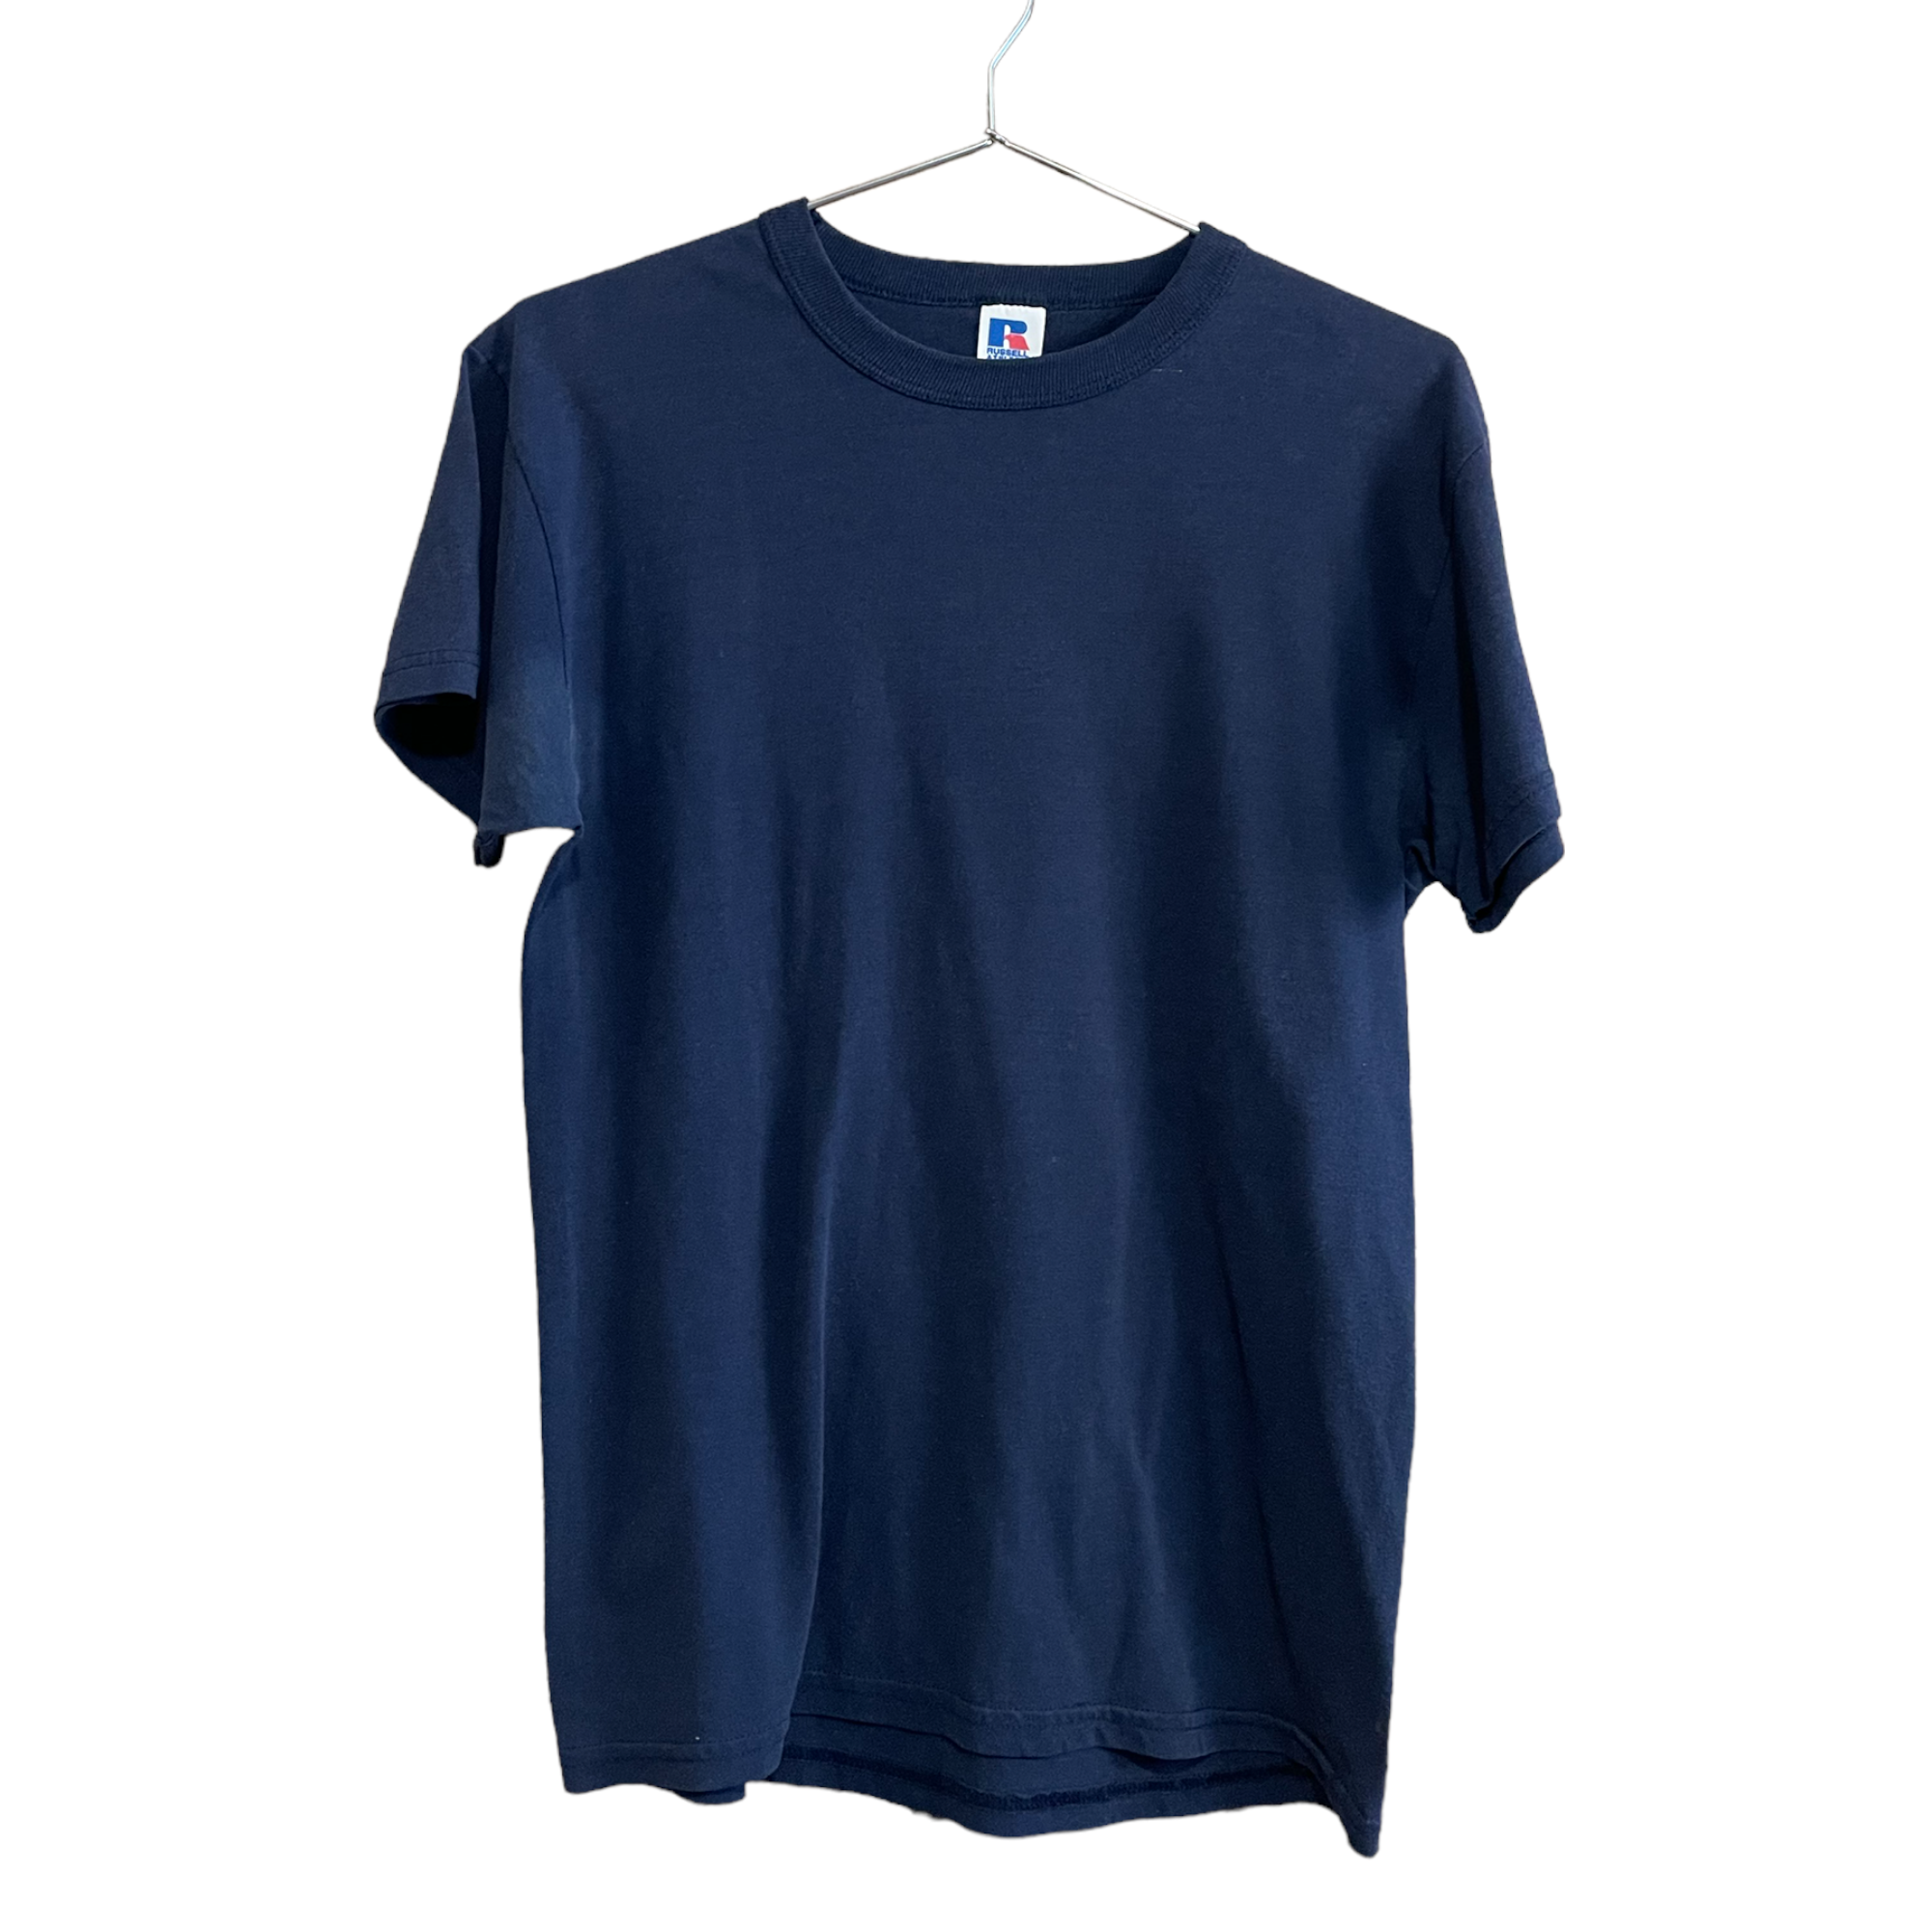 1990s Russell Athletic Tee - Navy Blue - S